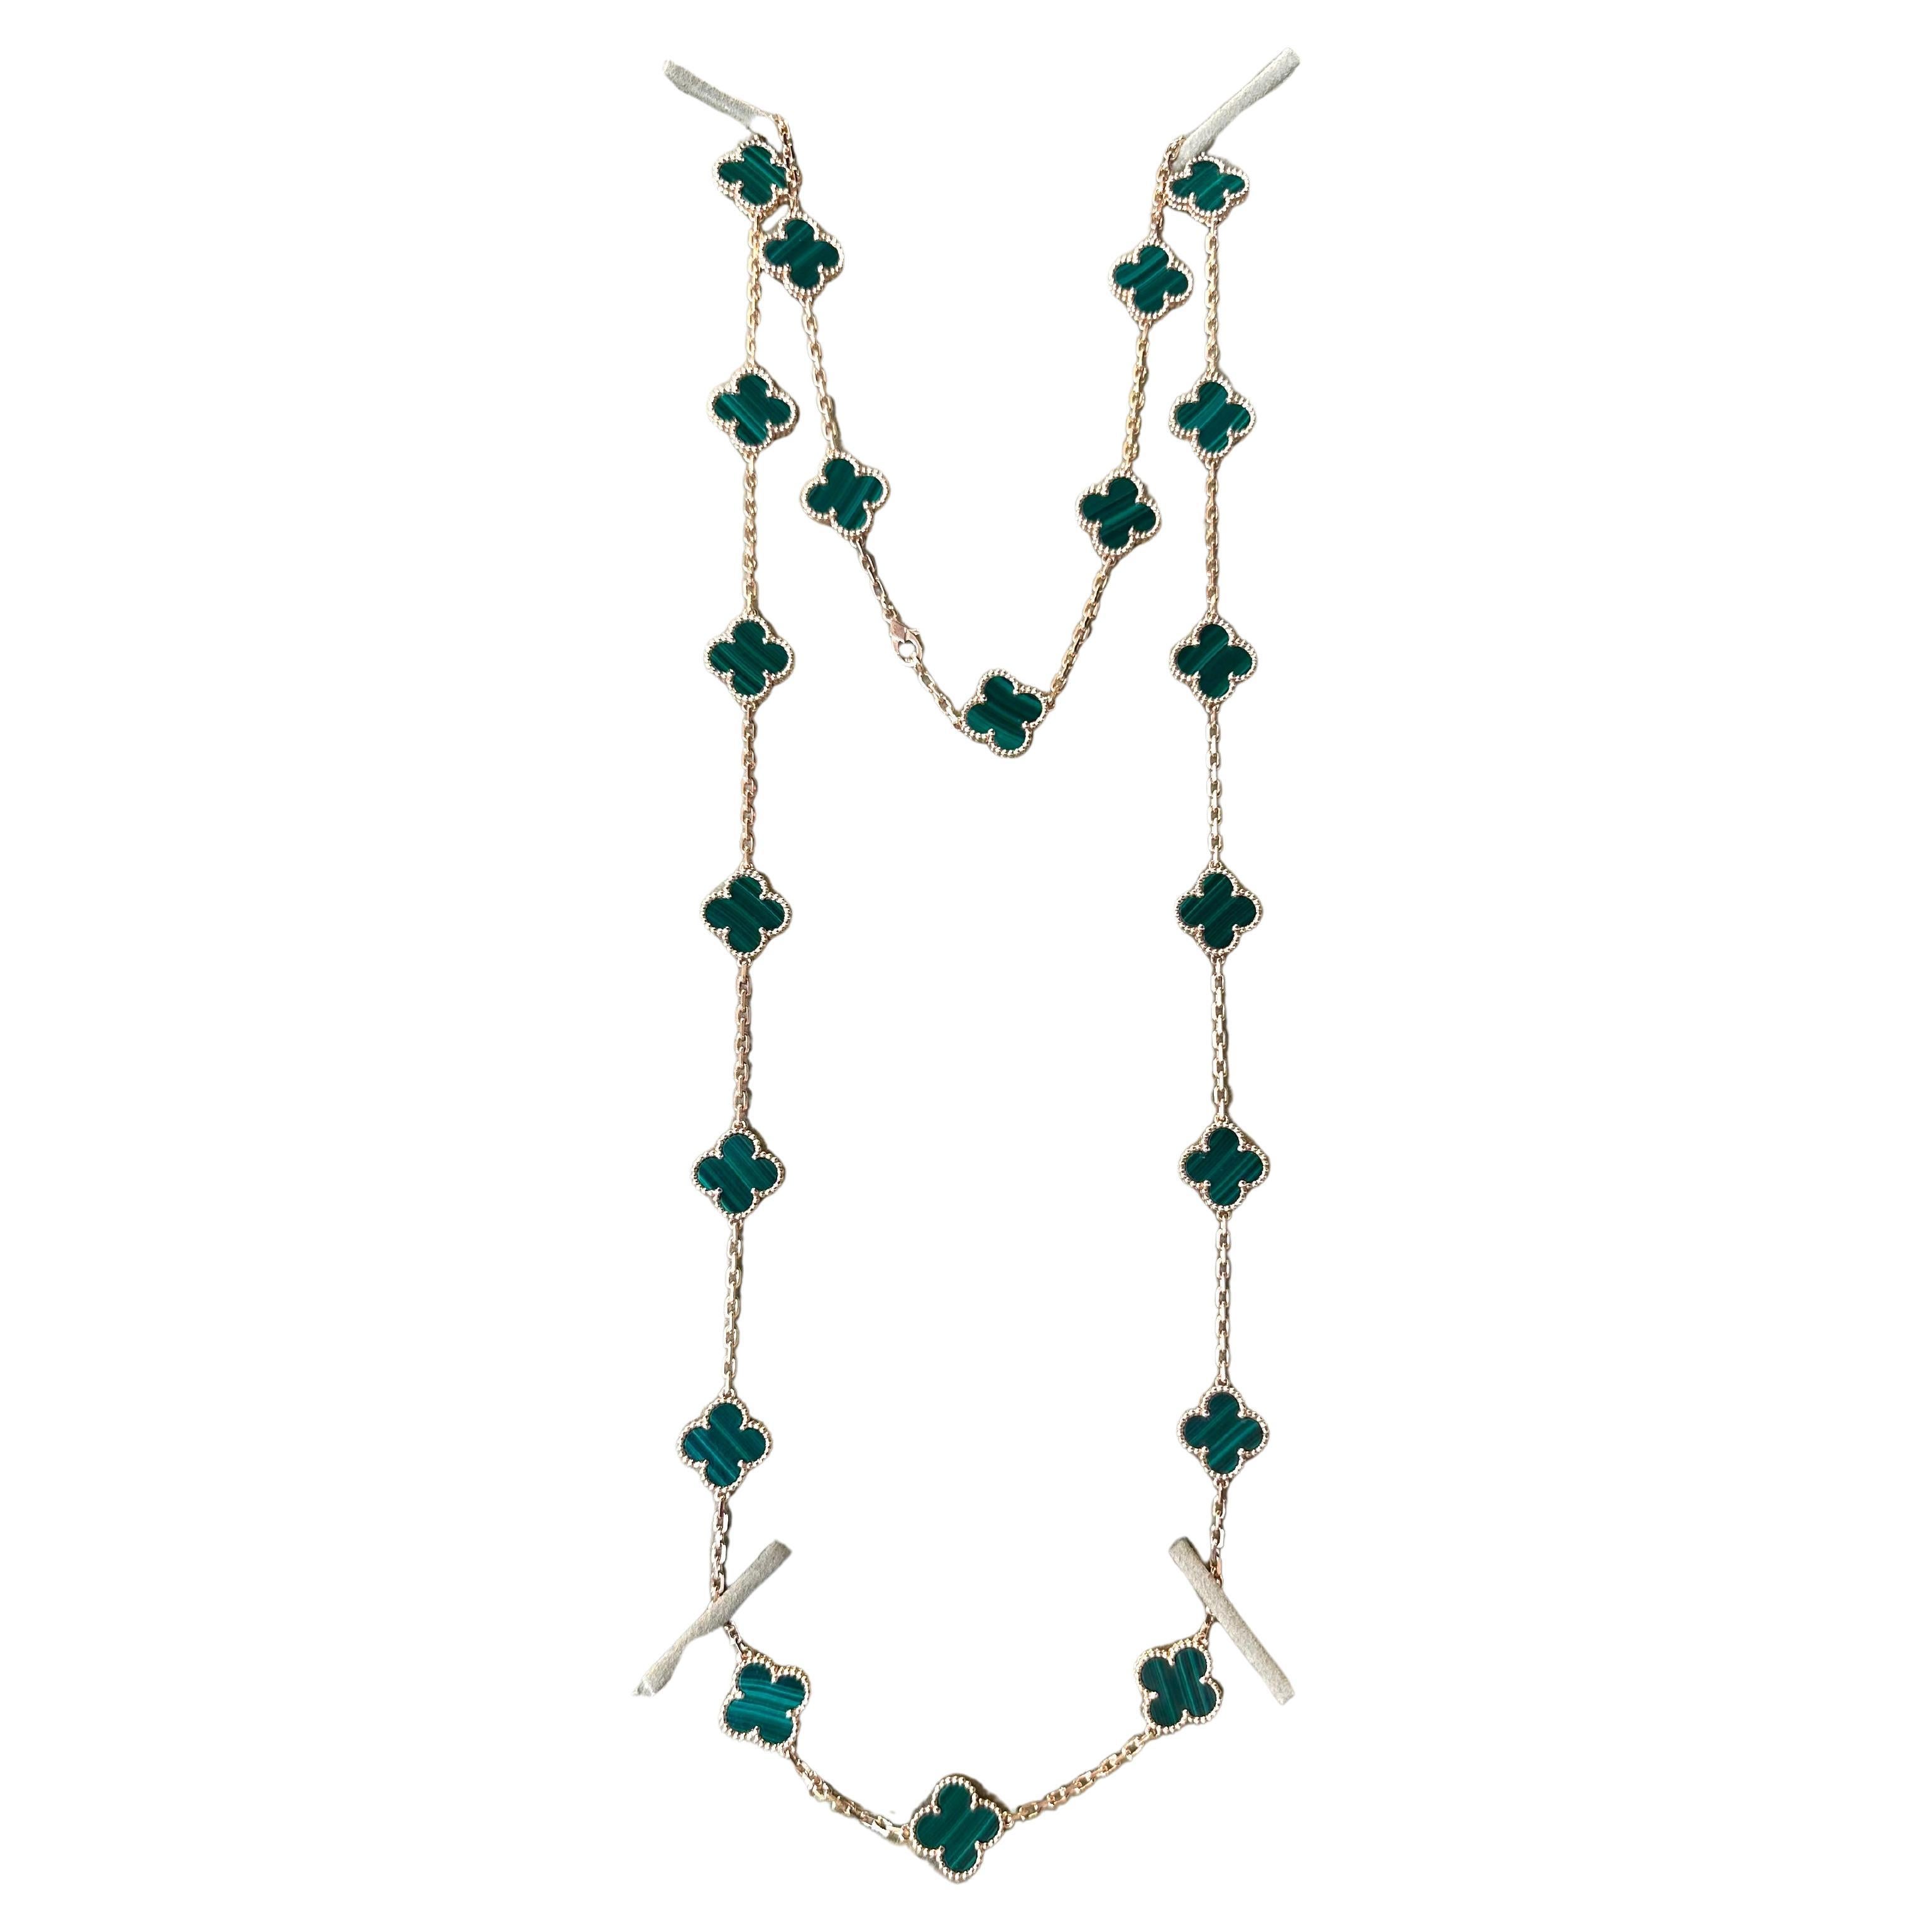 BRAND: Van Cleef & Arpels

COLLECTION: Vintage Alhambra

METAL: 18k Yellow Gold

STONE: Malachite

PACKAGING: Original VCA Packaging and Certificate of  Authenticity